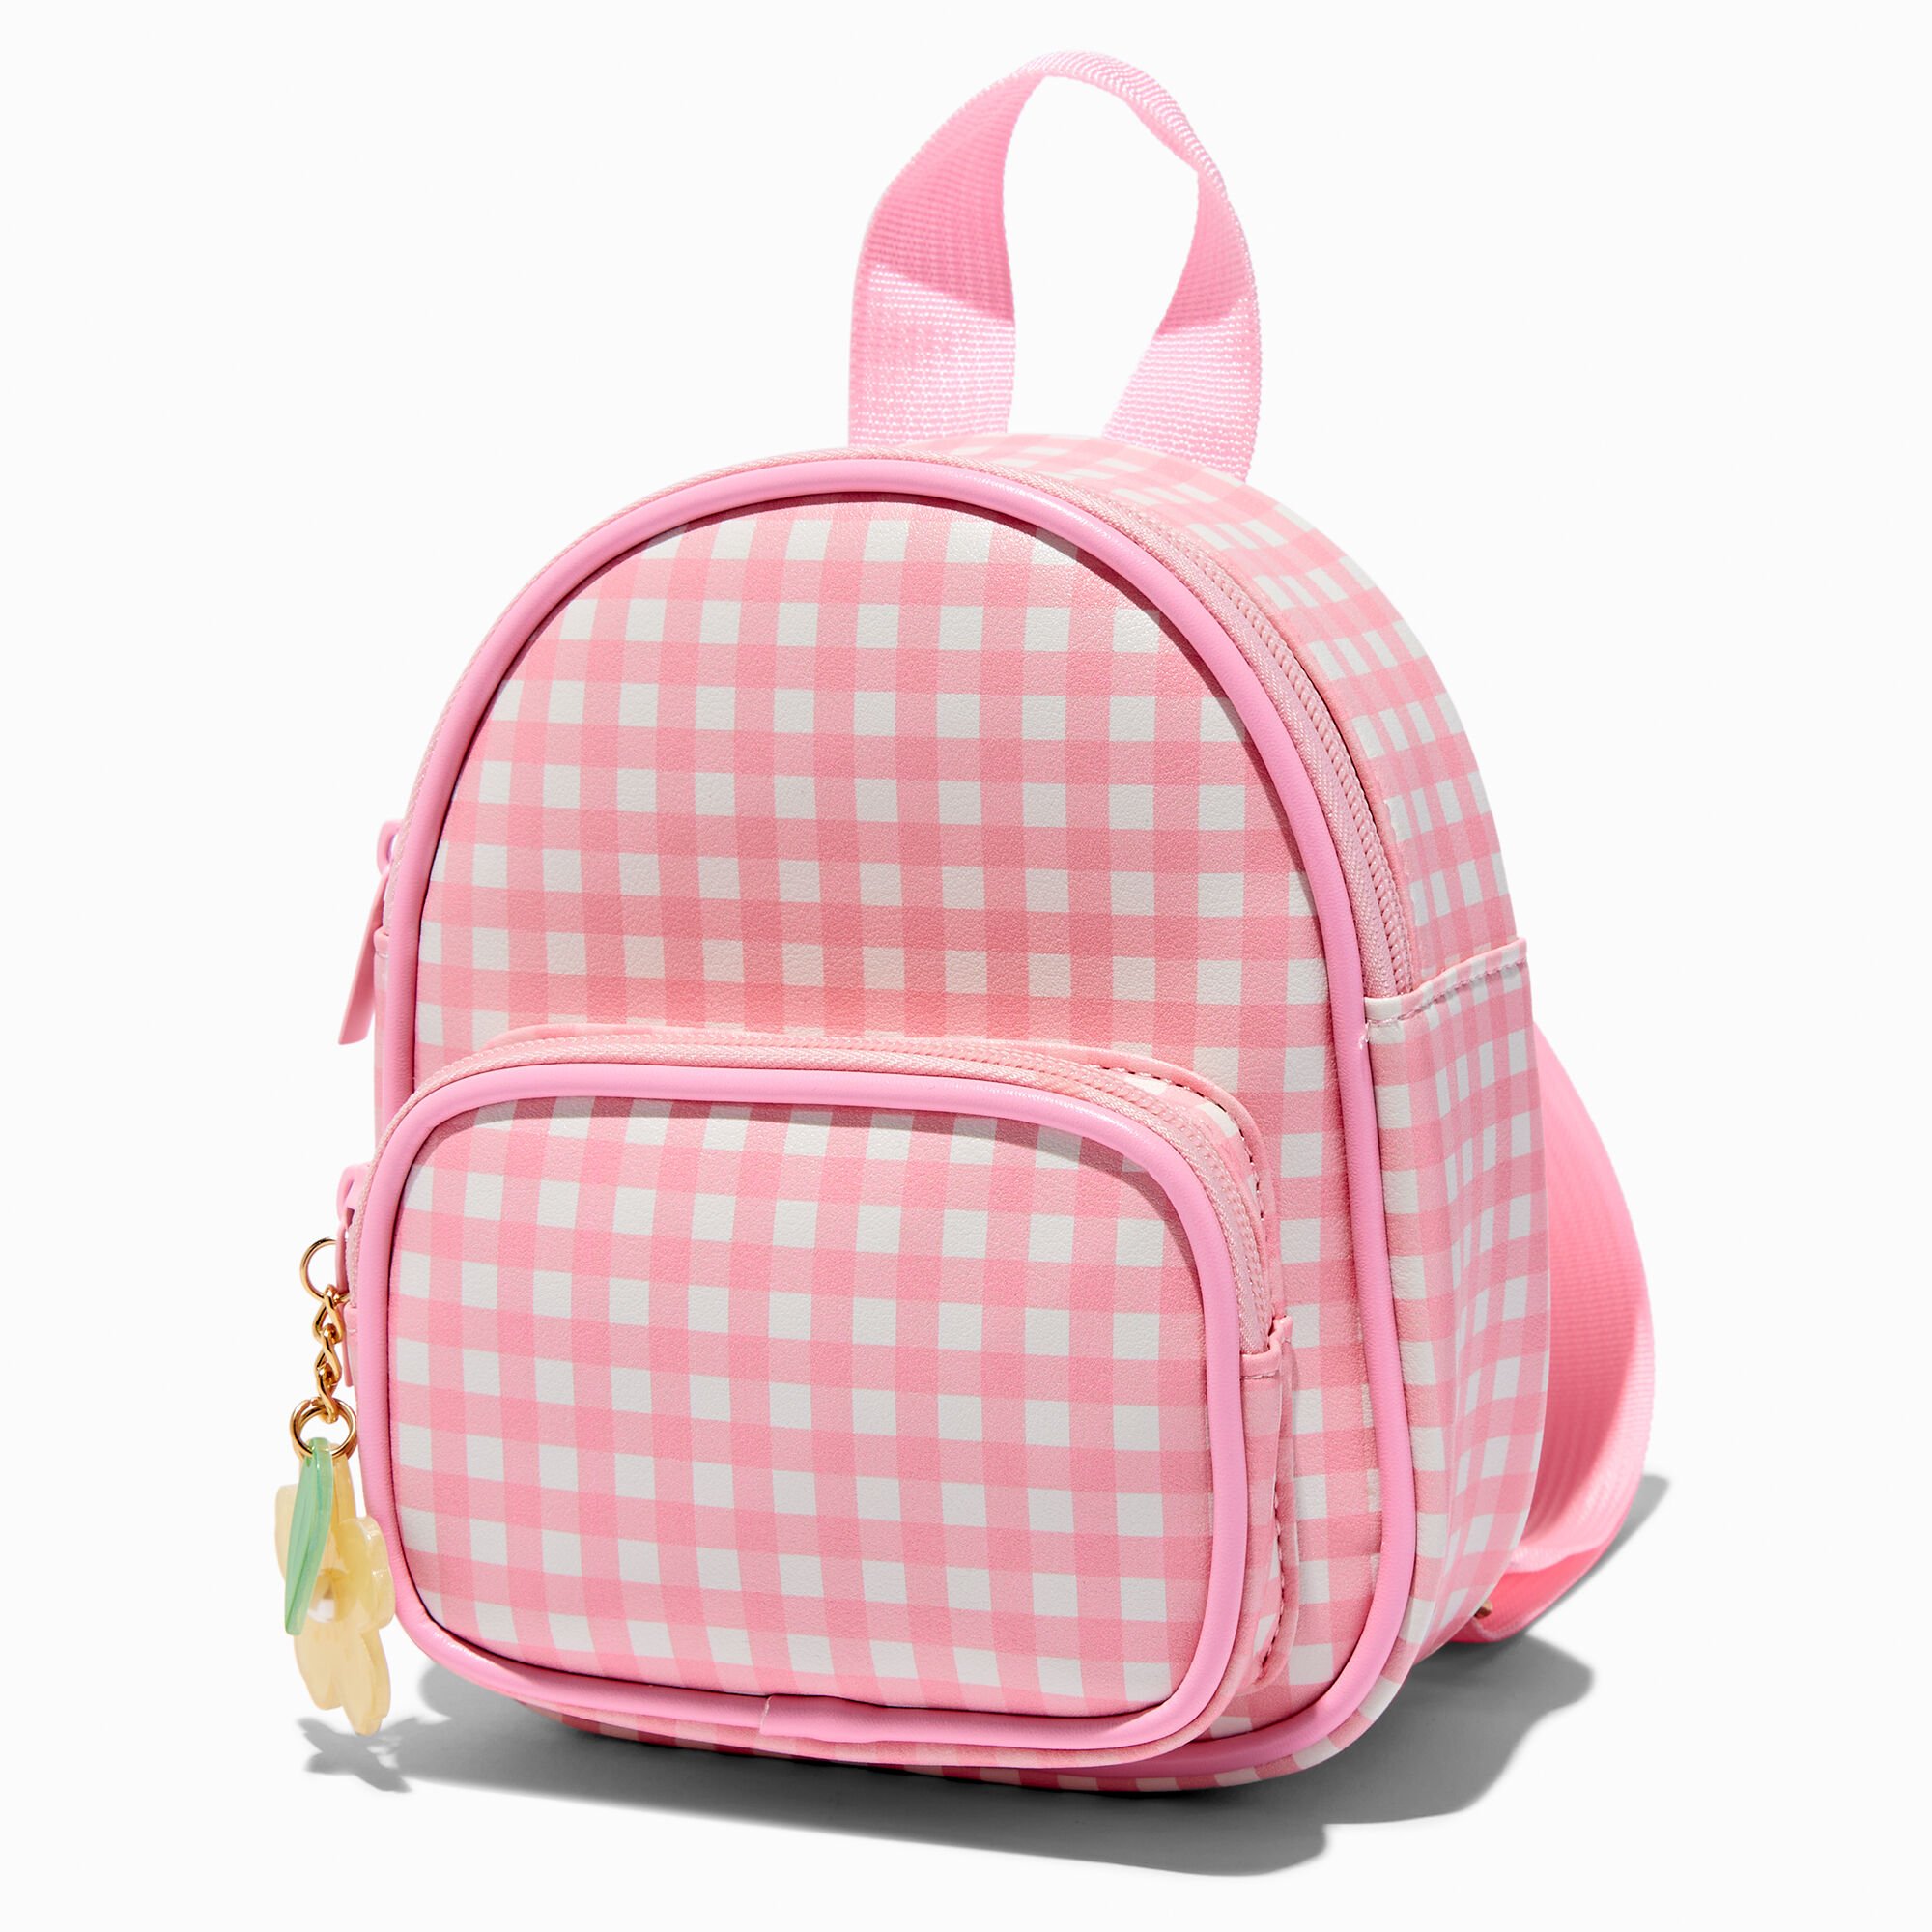 View Claires Club Gingham Backpack Pink information